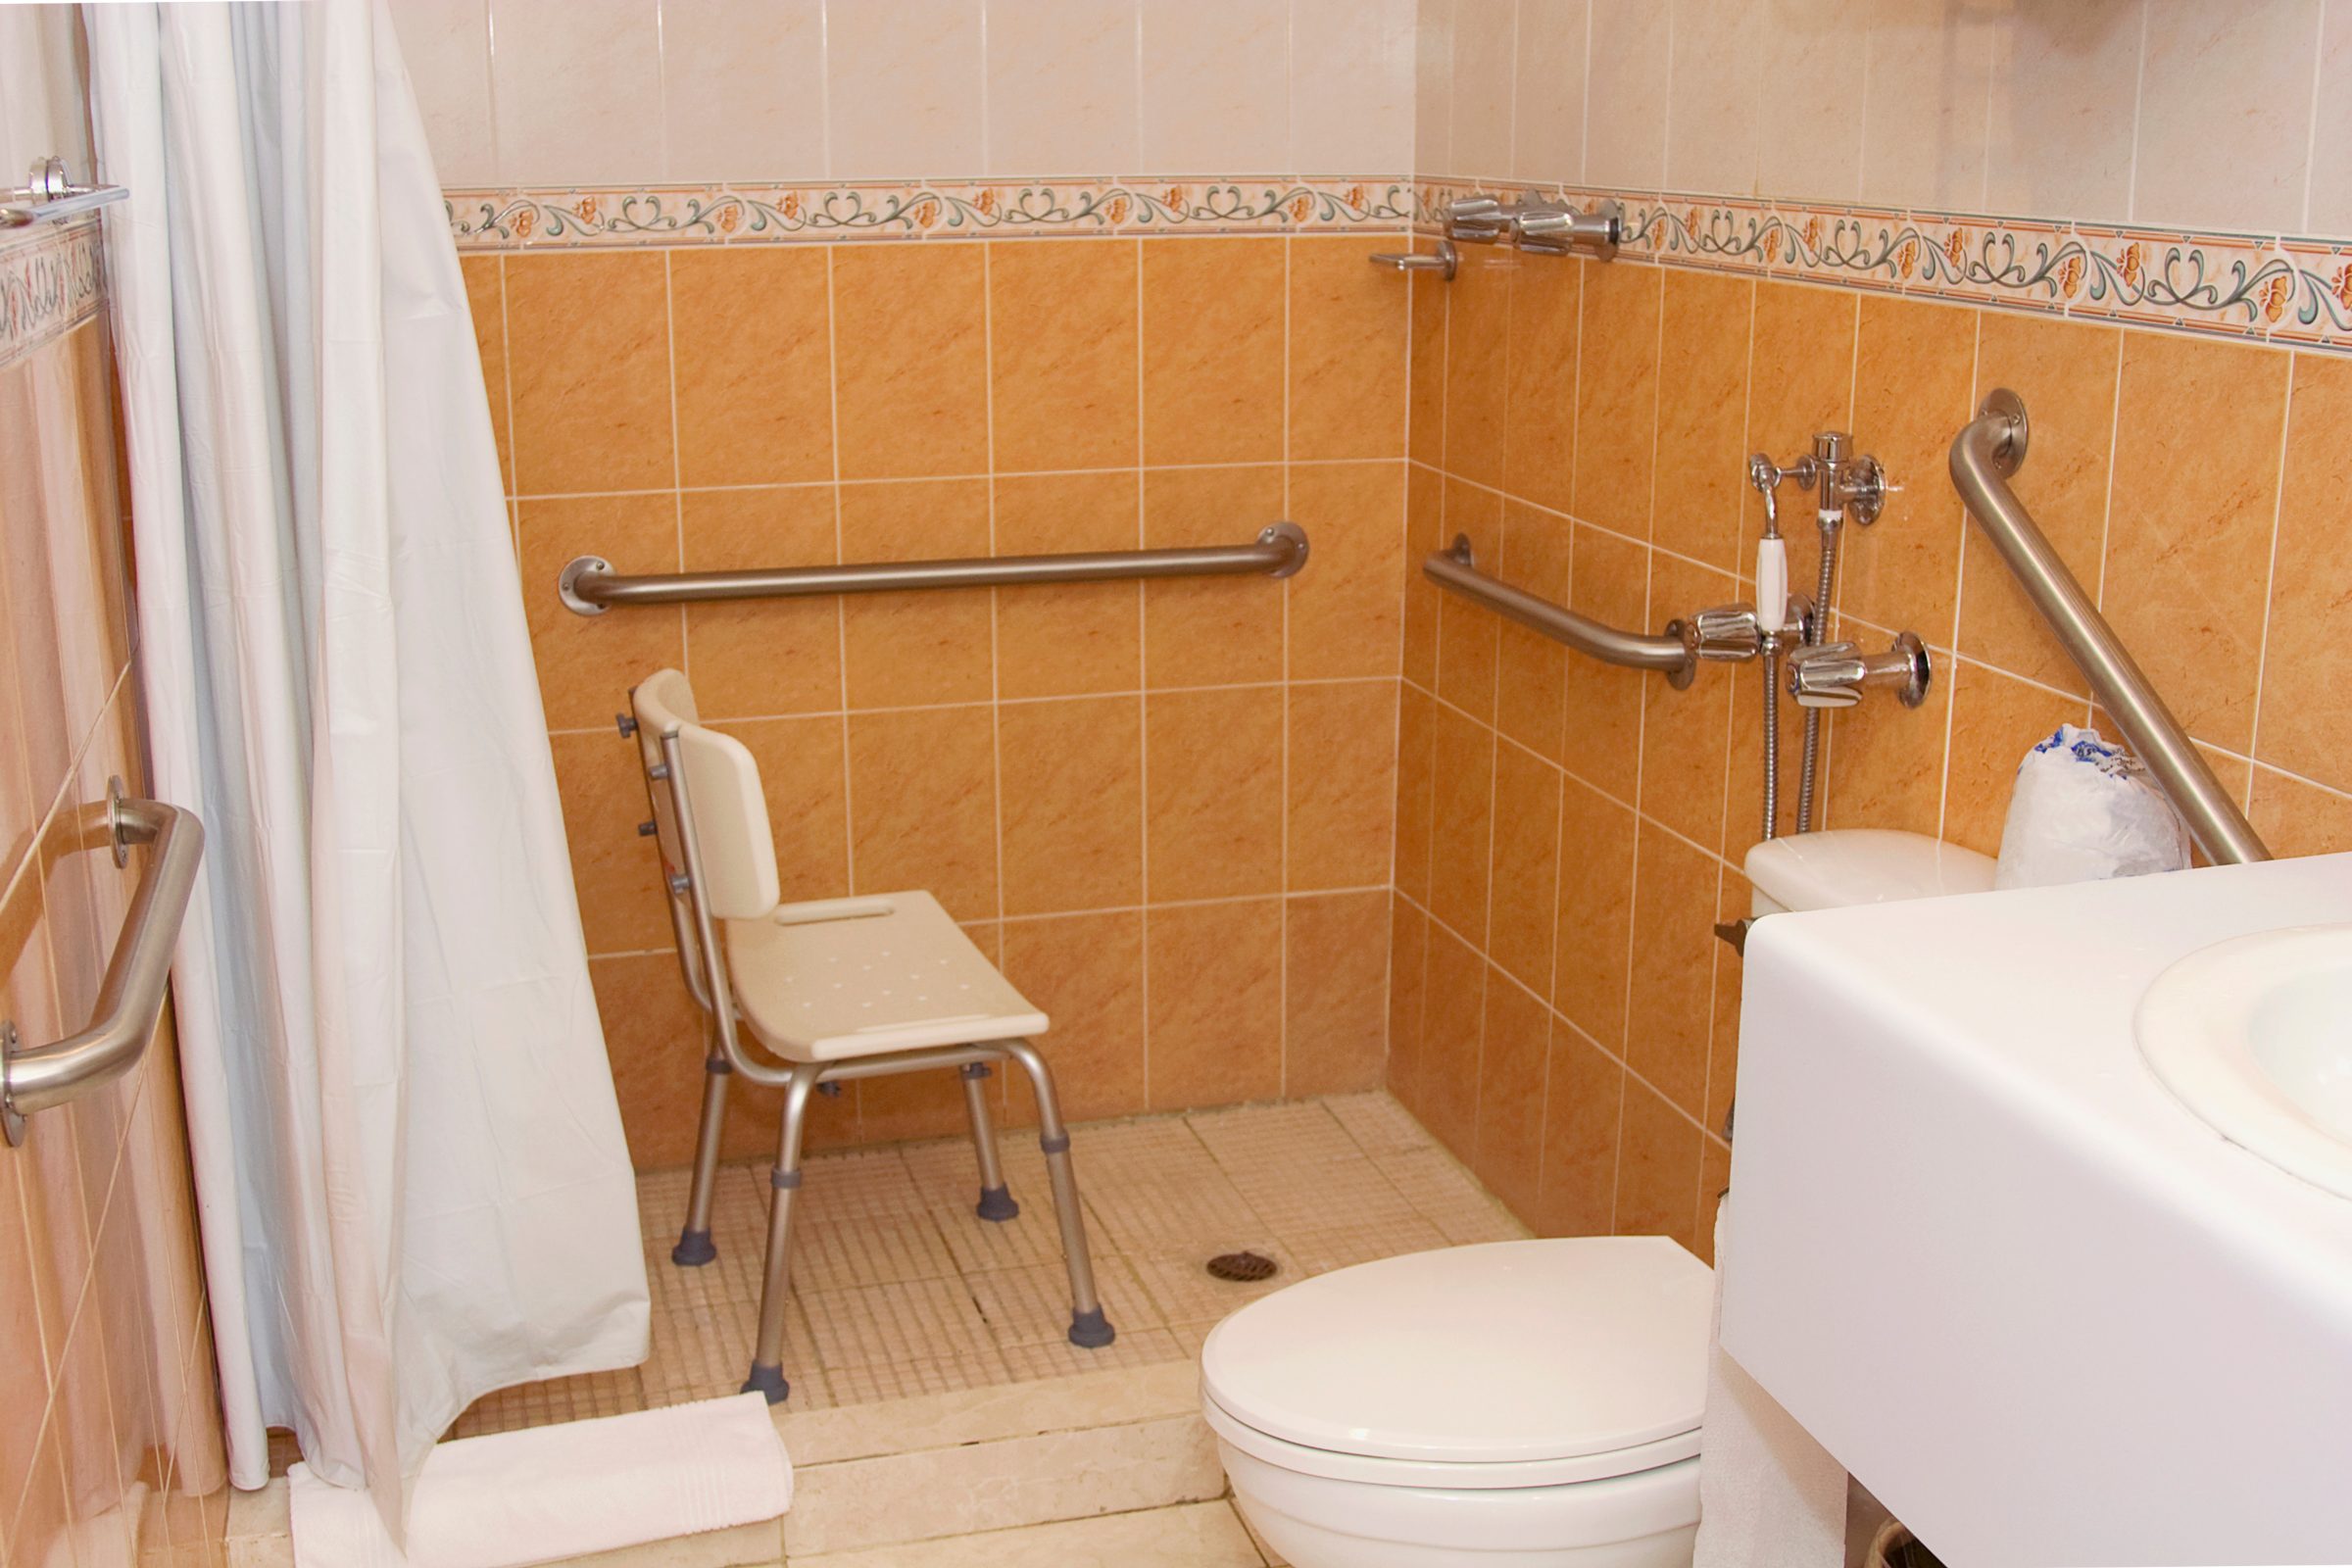 How To Make a Bathroom Accessible for Anyone